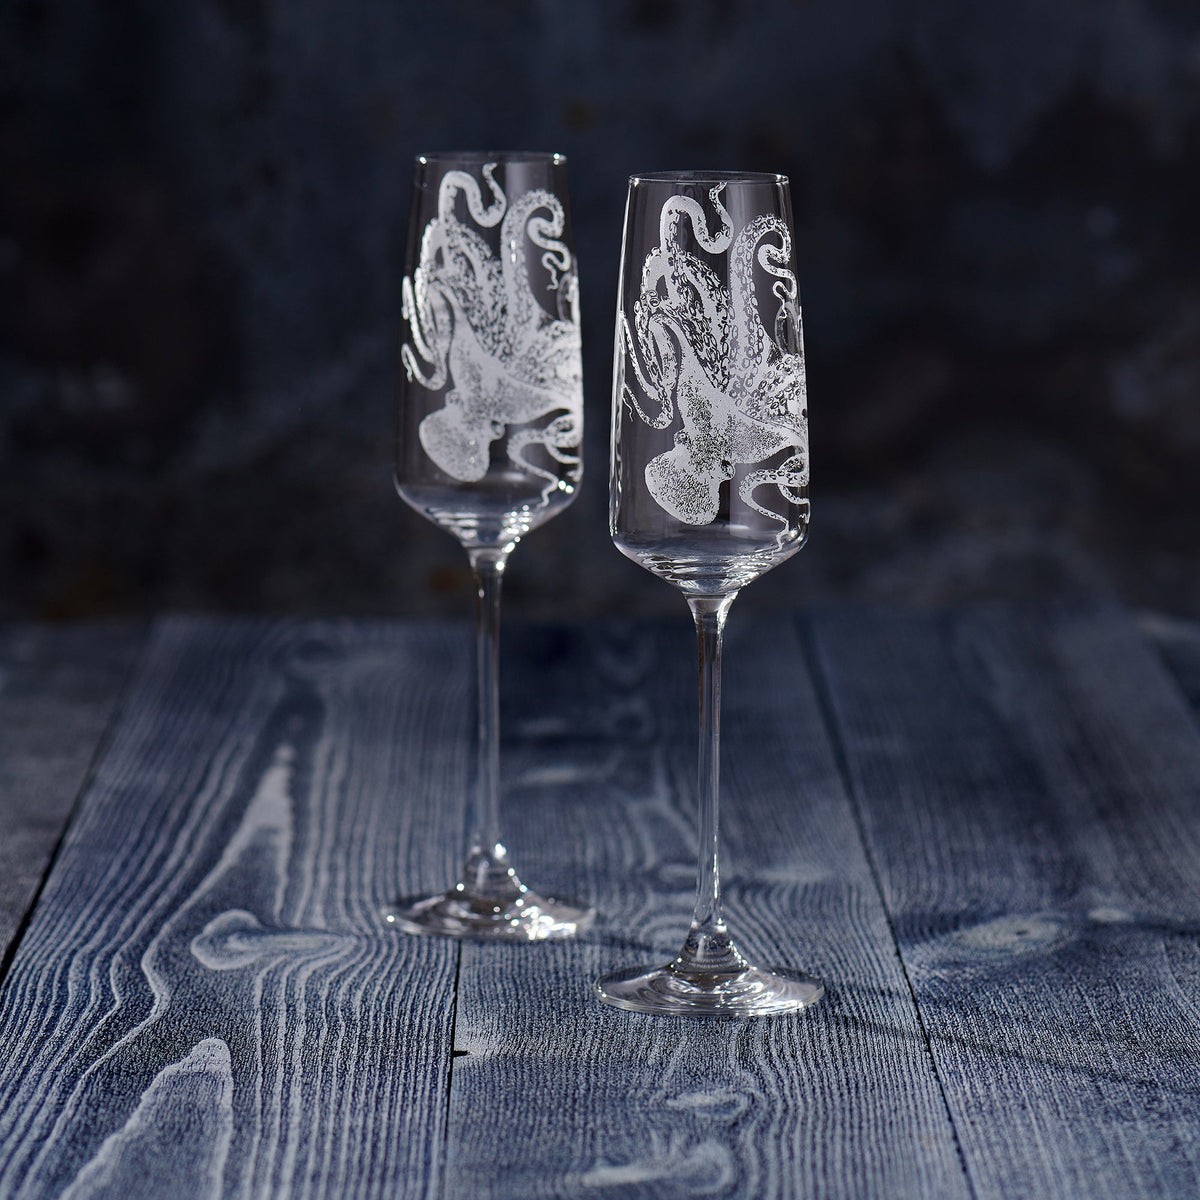 Two Lucy Champagne Glasses with a Caskata Artisanal Home design on them.